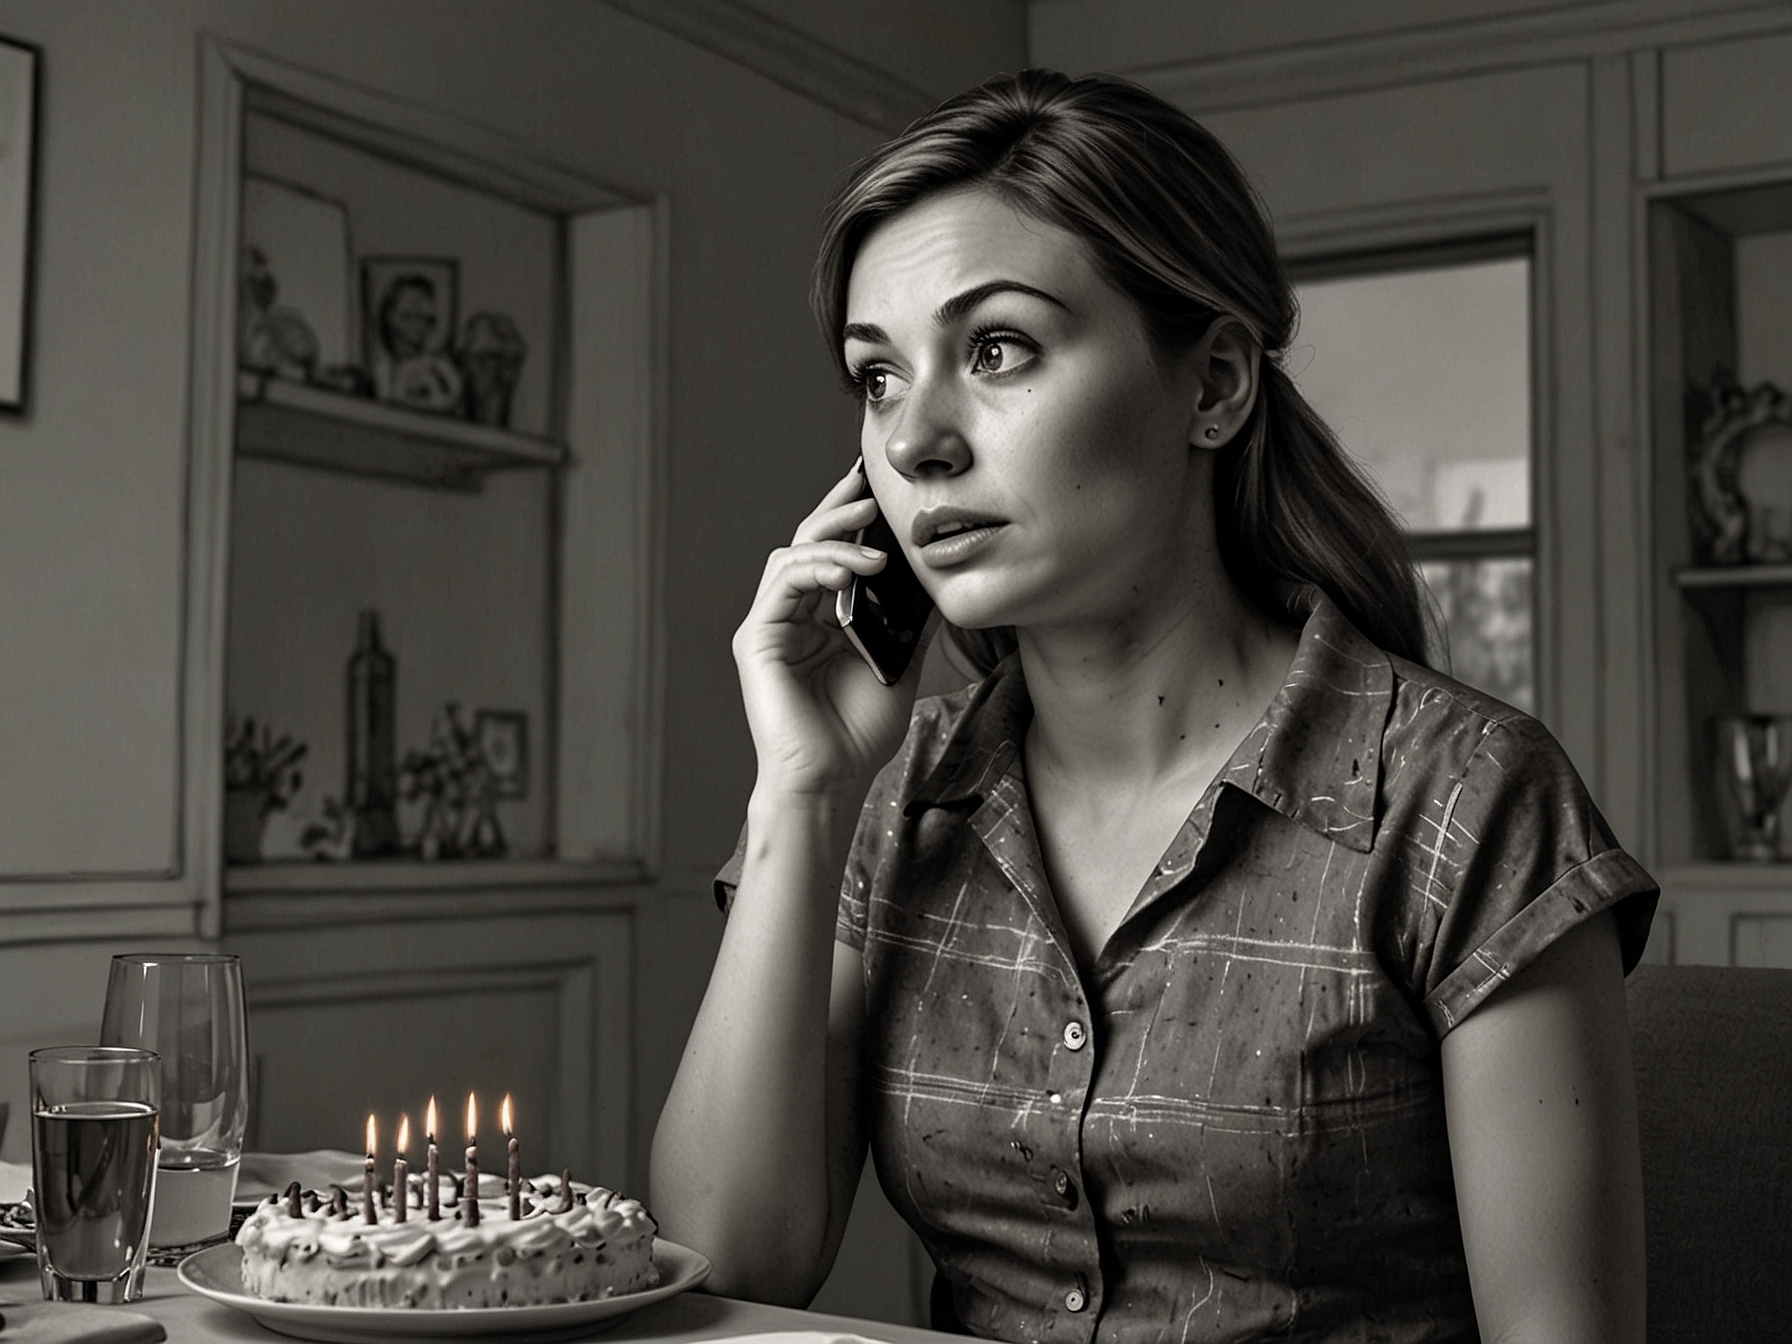 An illustration of a wife looking distressed while eavesdropping on a surprise birthday party being planned by her mother-in-law, who is on the phone.